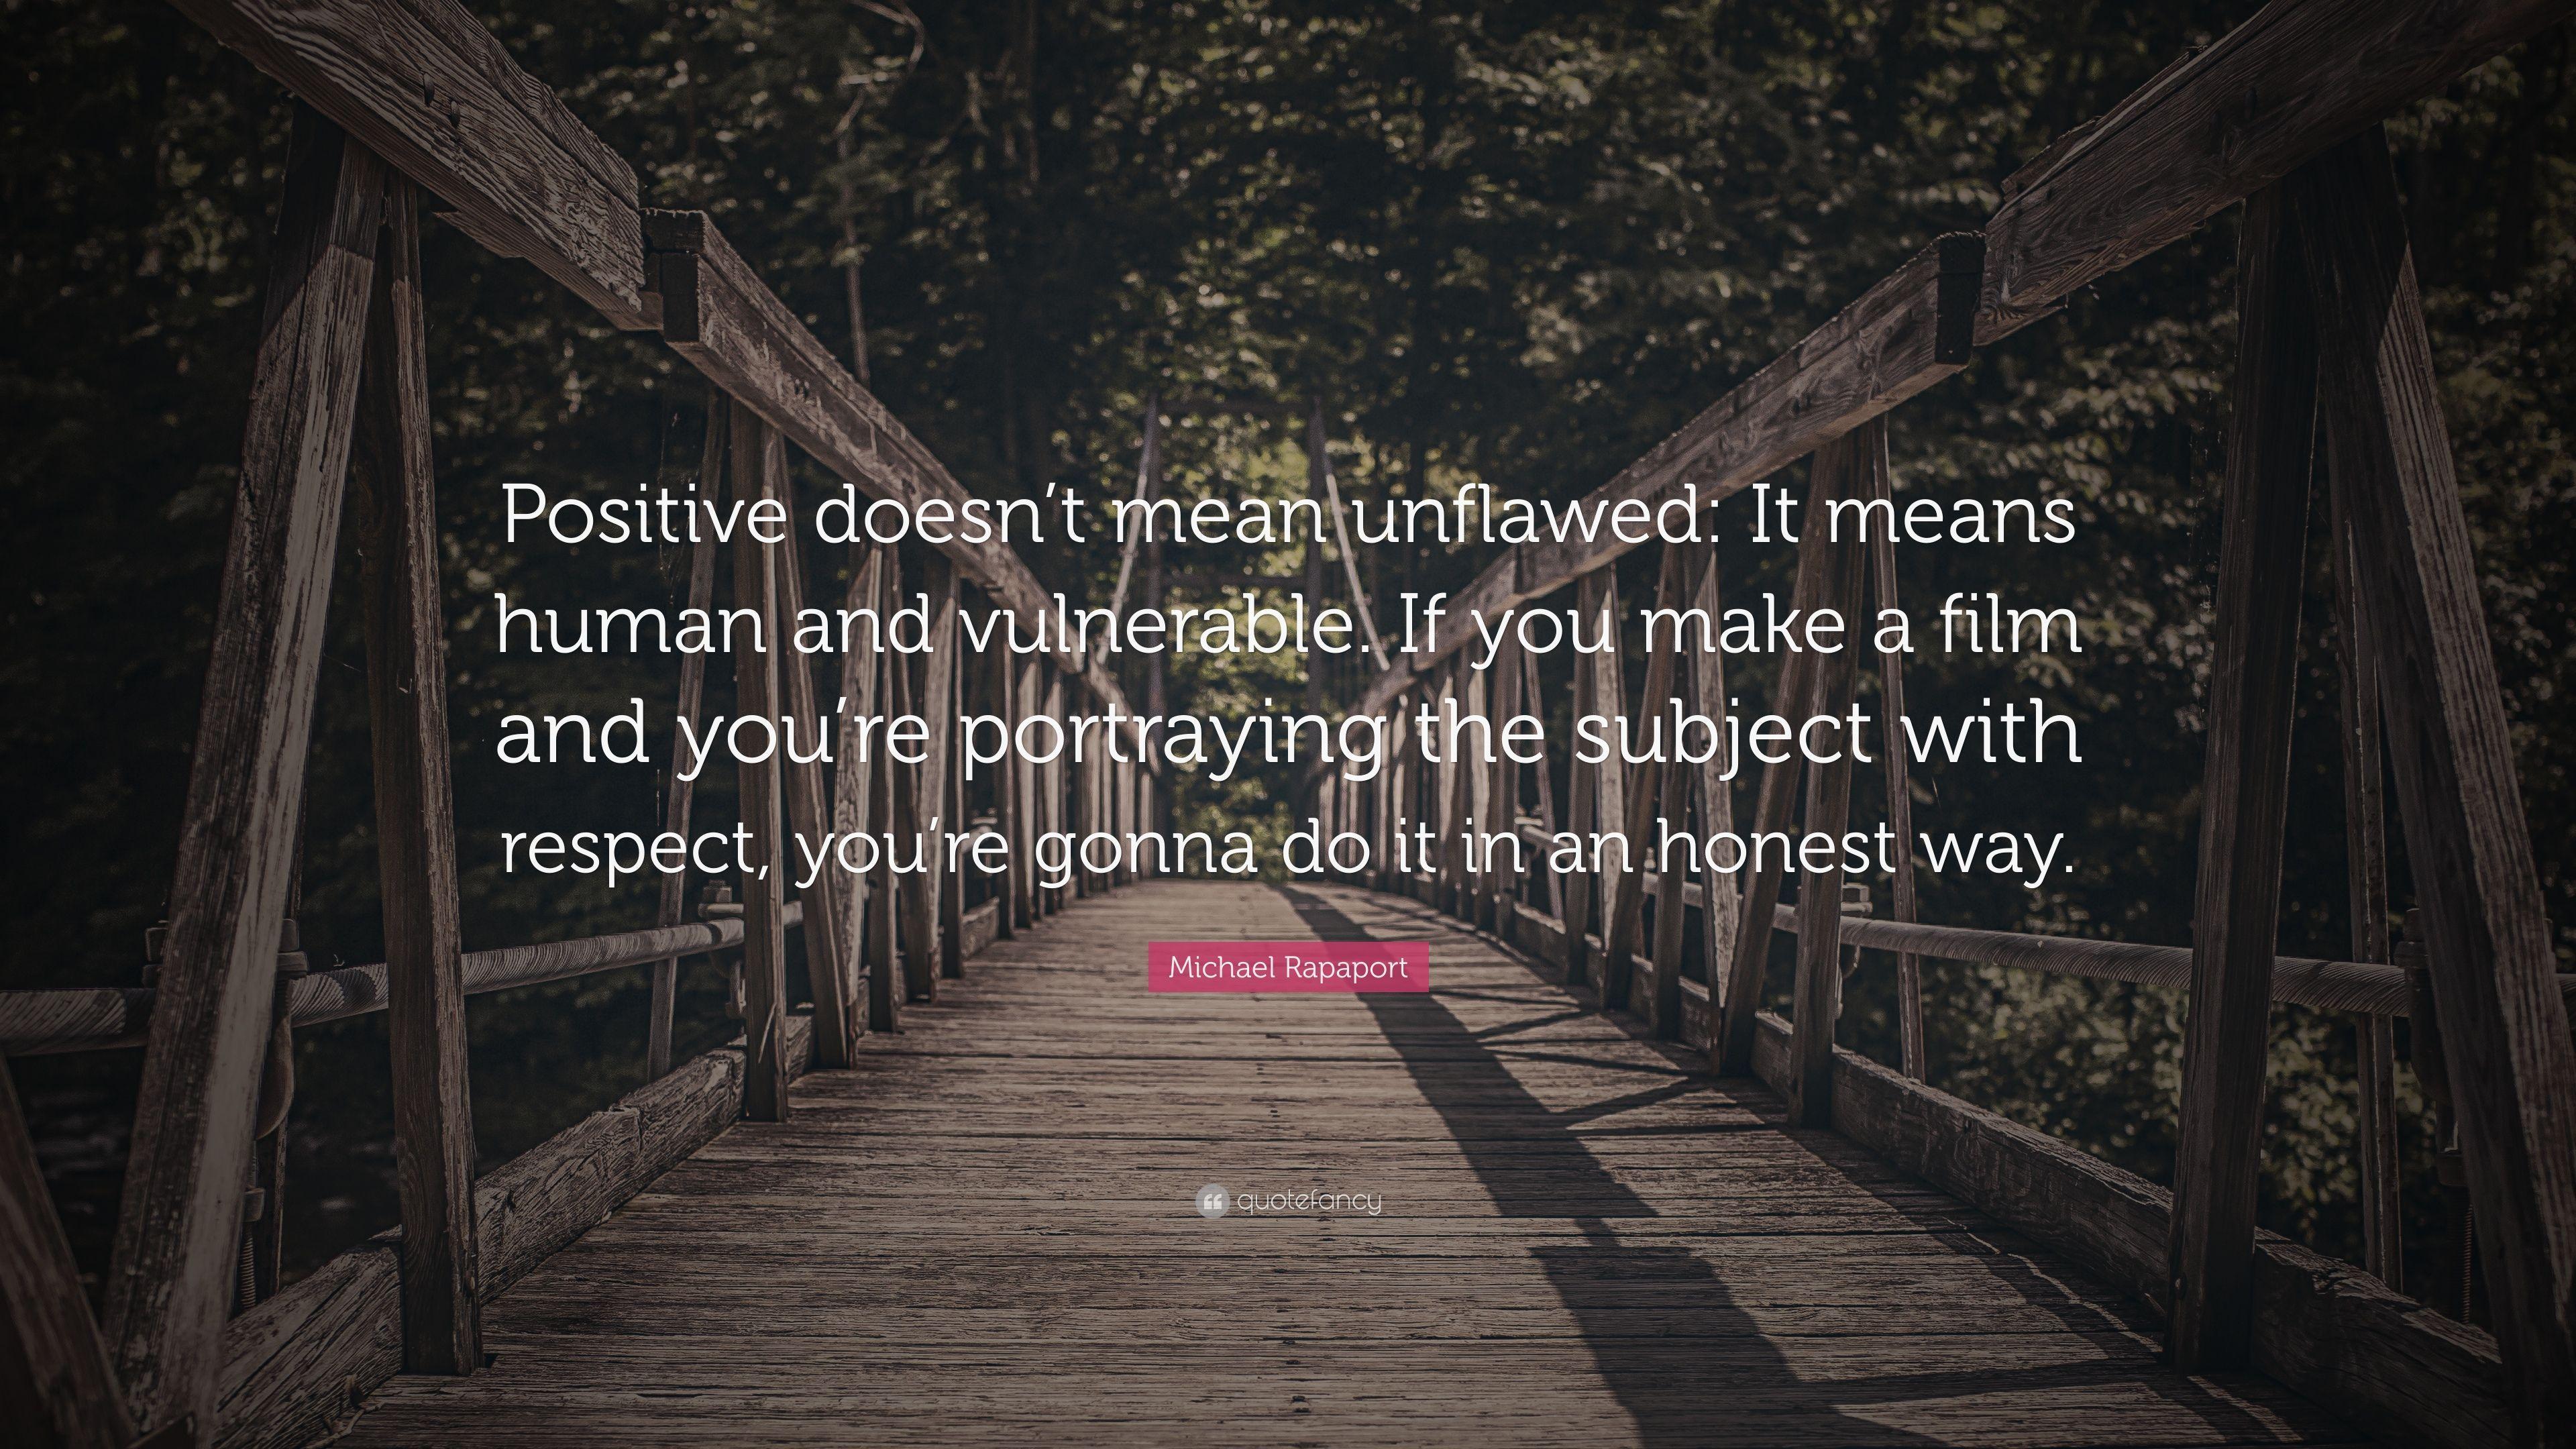 Michael Rapaport Quote: “Positive doesn't mean unflawed: It means